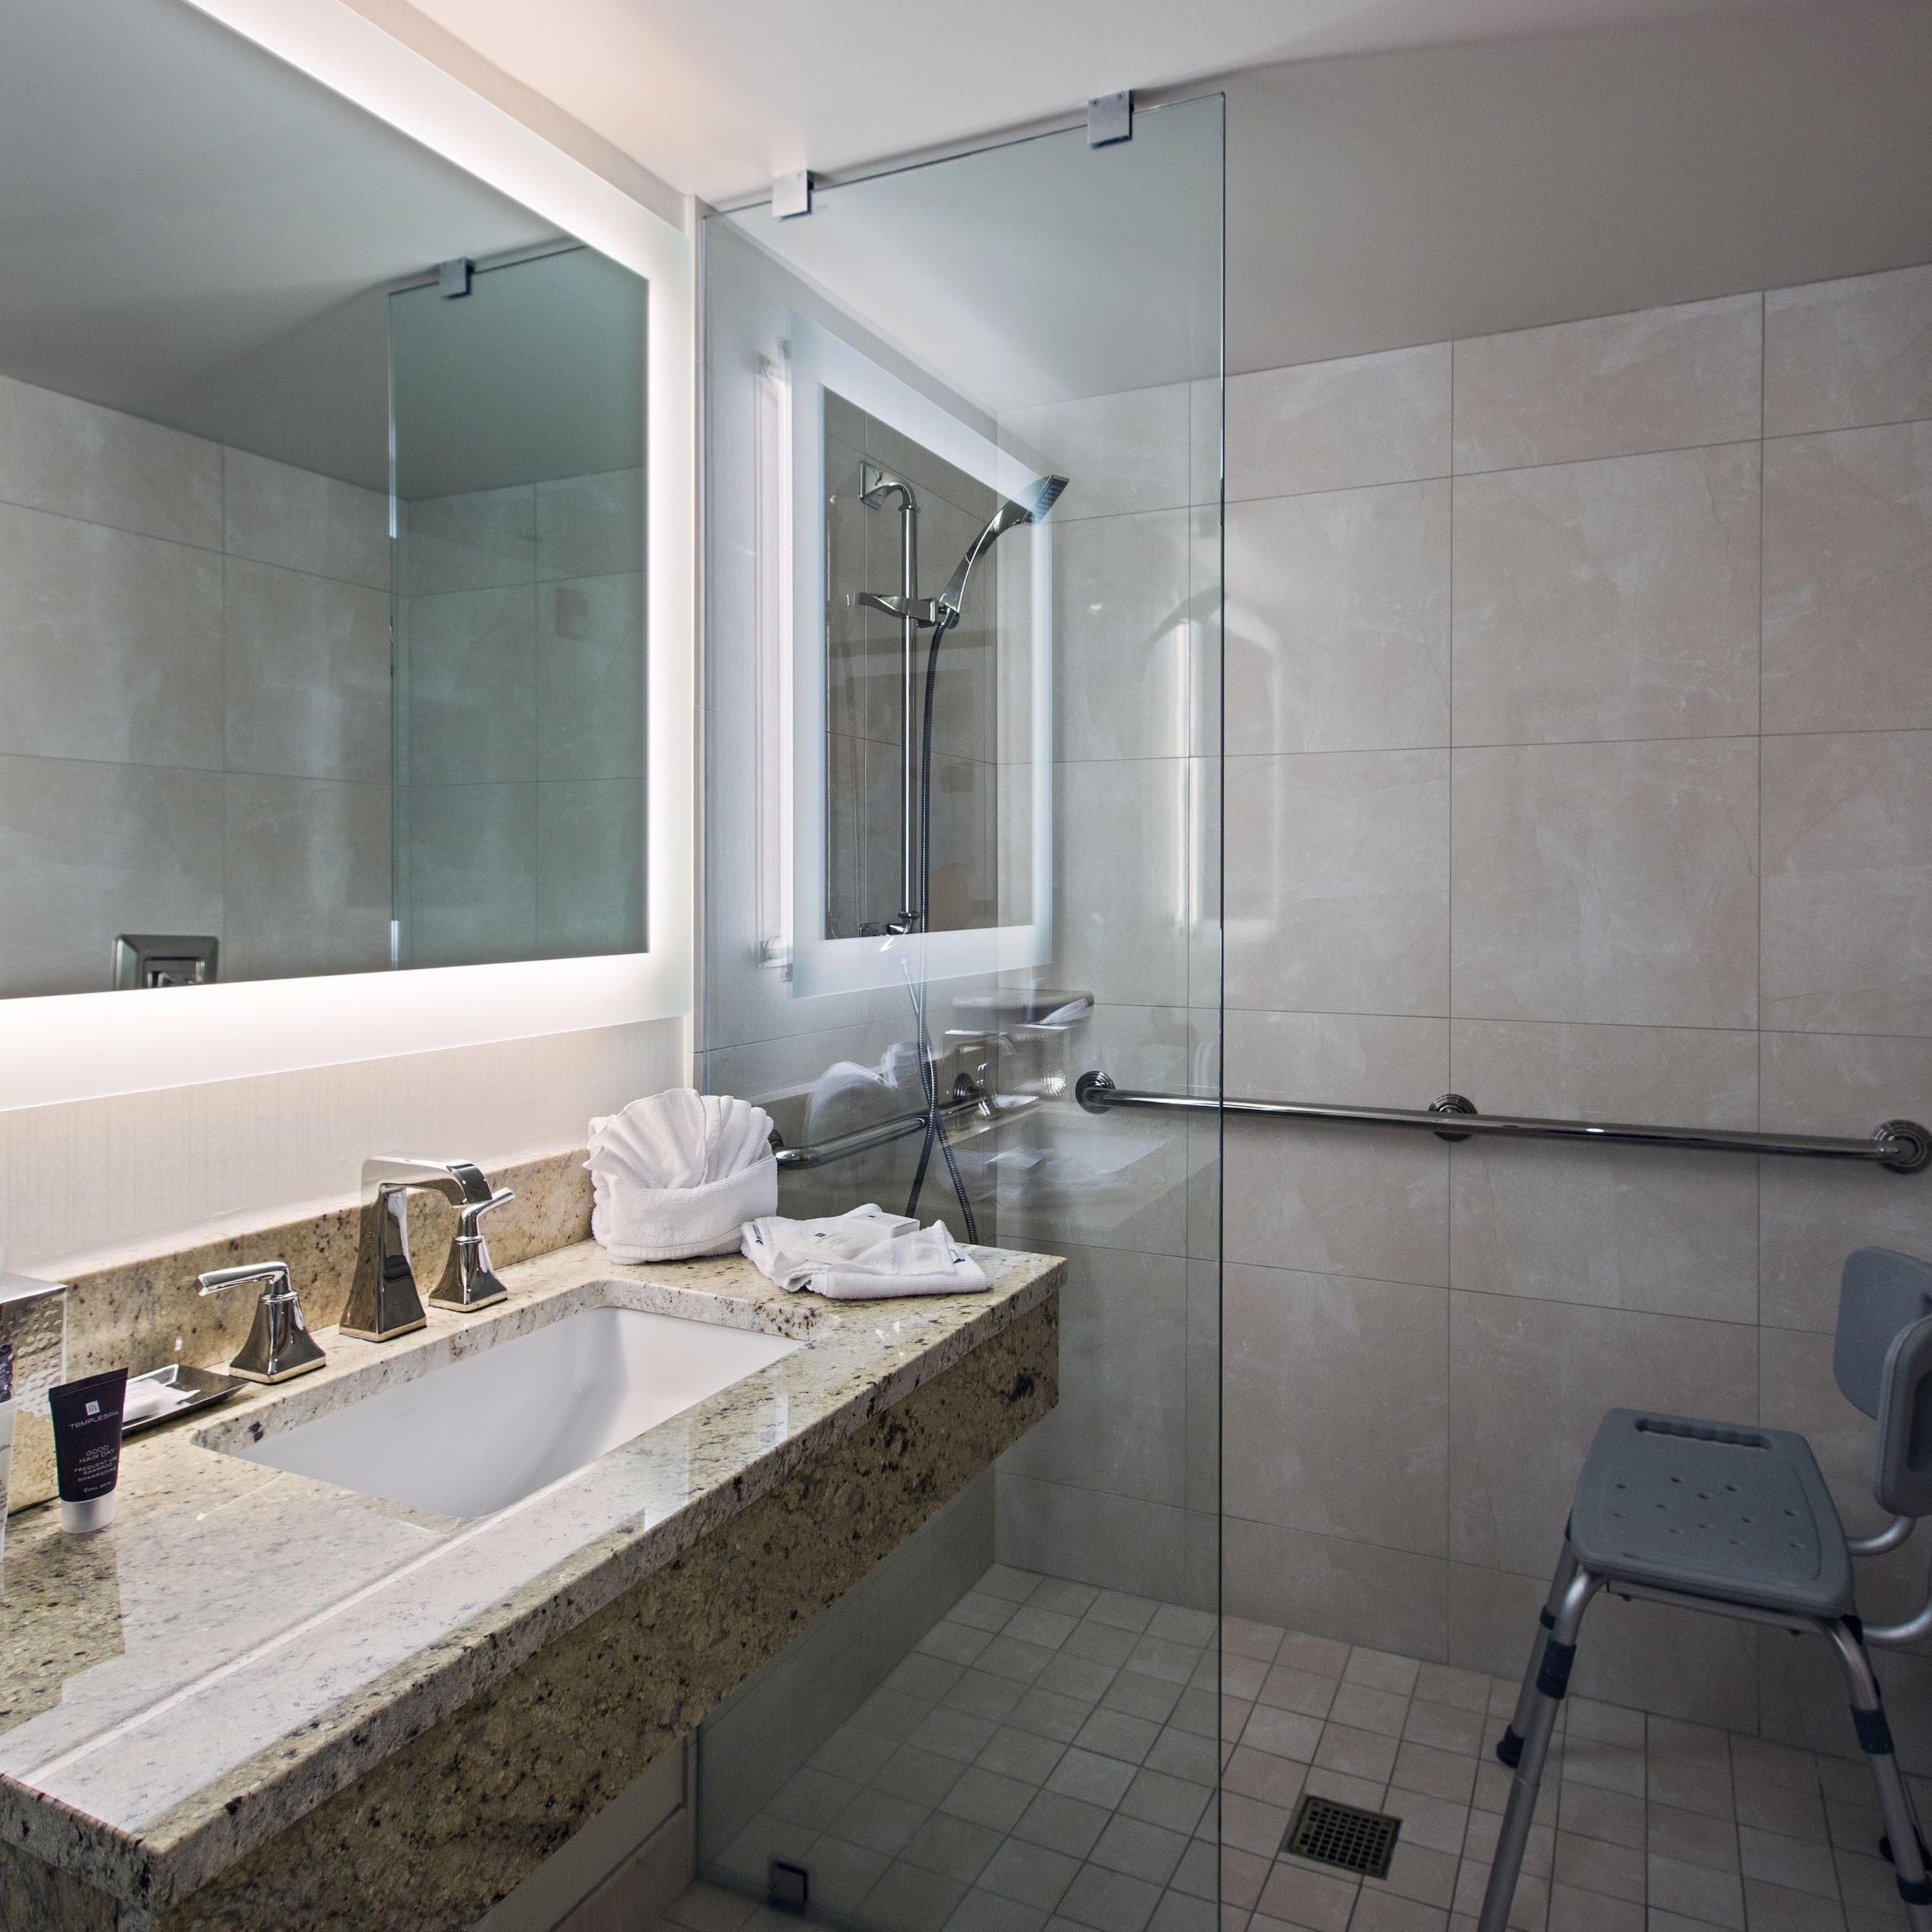 Up-to-Date ADA Accessible Guest Bathroom with Roll-in Shower